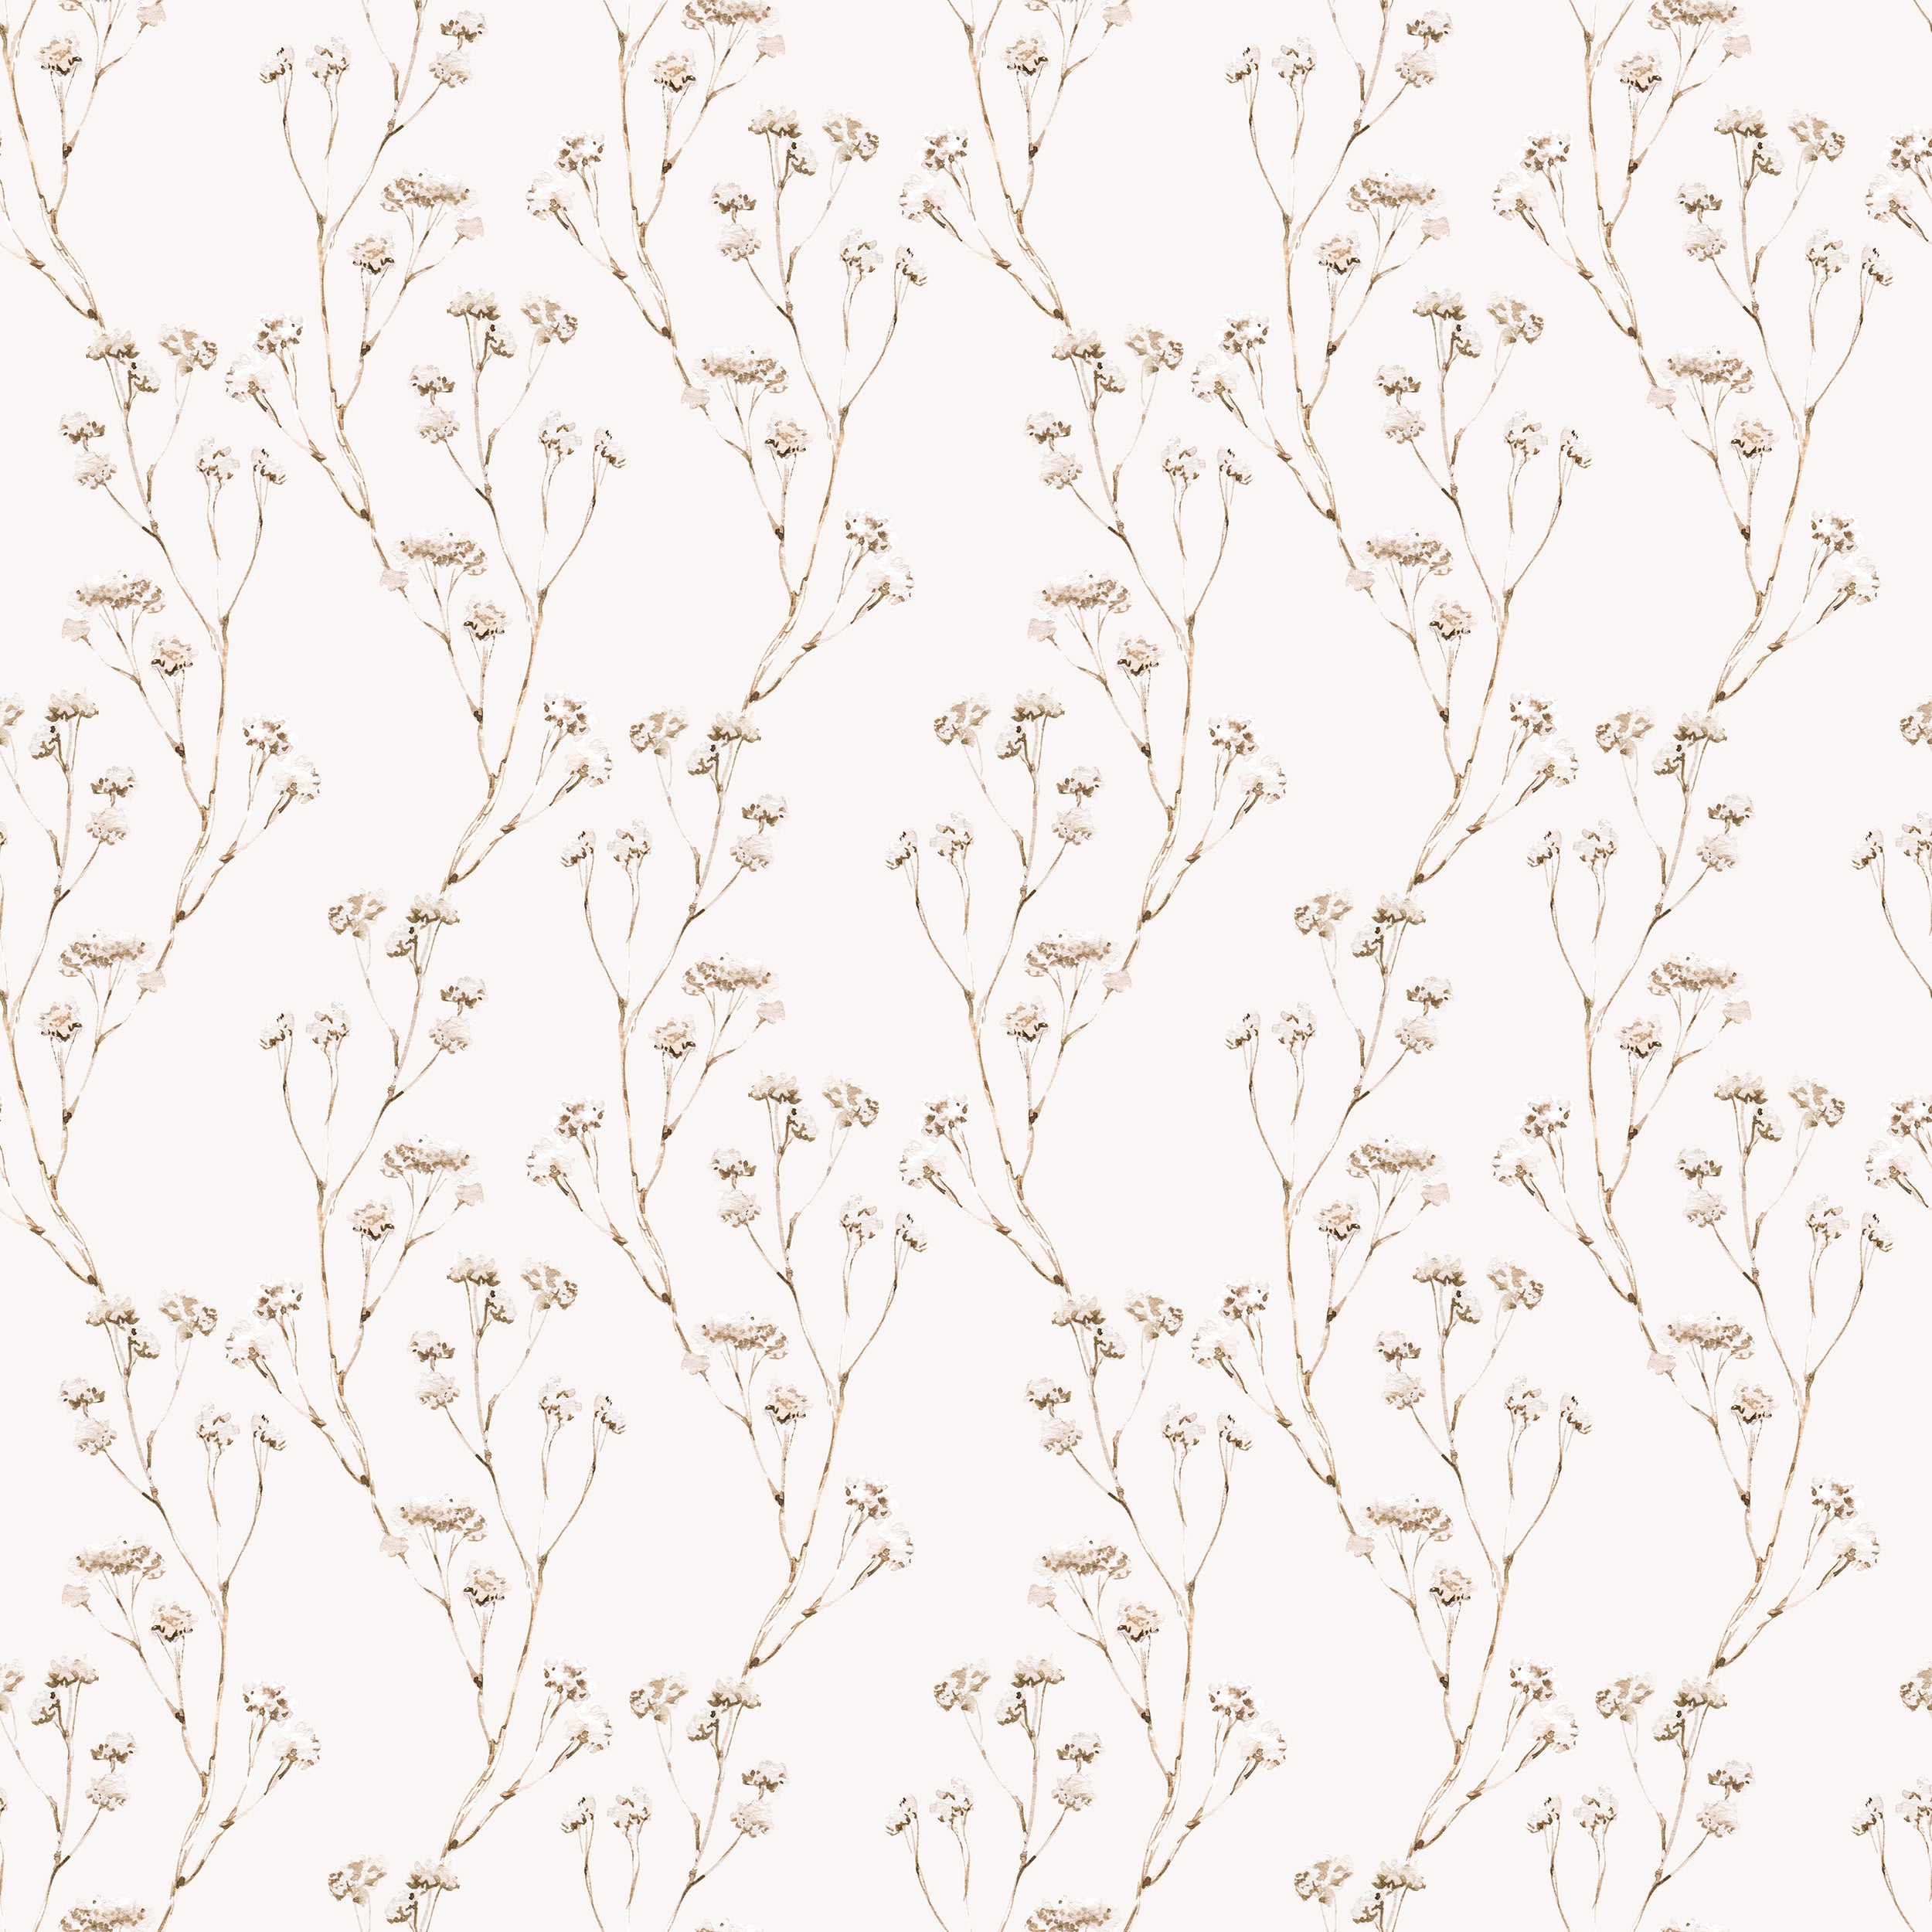 A close-up of the 'Boho Branches Wallpaper' showing its subtle and artistic branch design with soft brown accents on a cream background, bringing an organic touch to the decor.